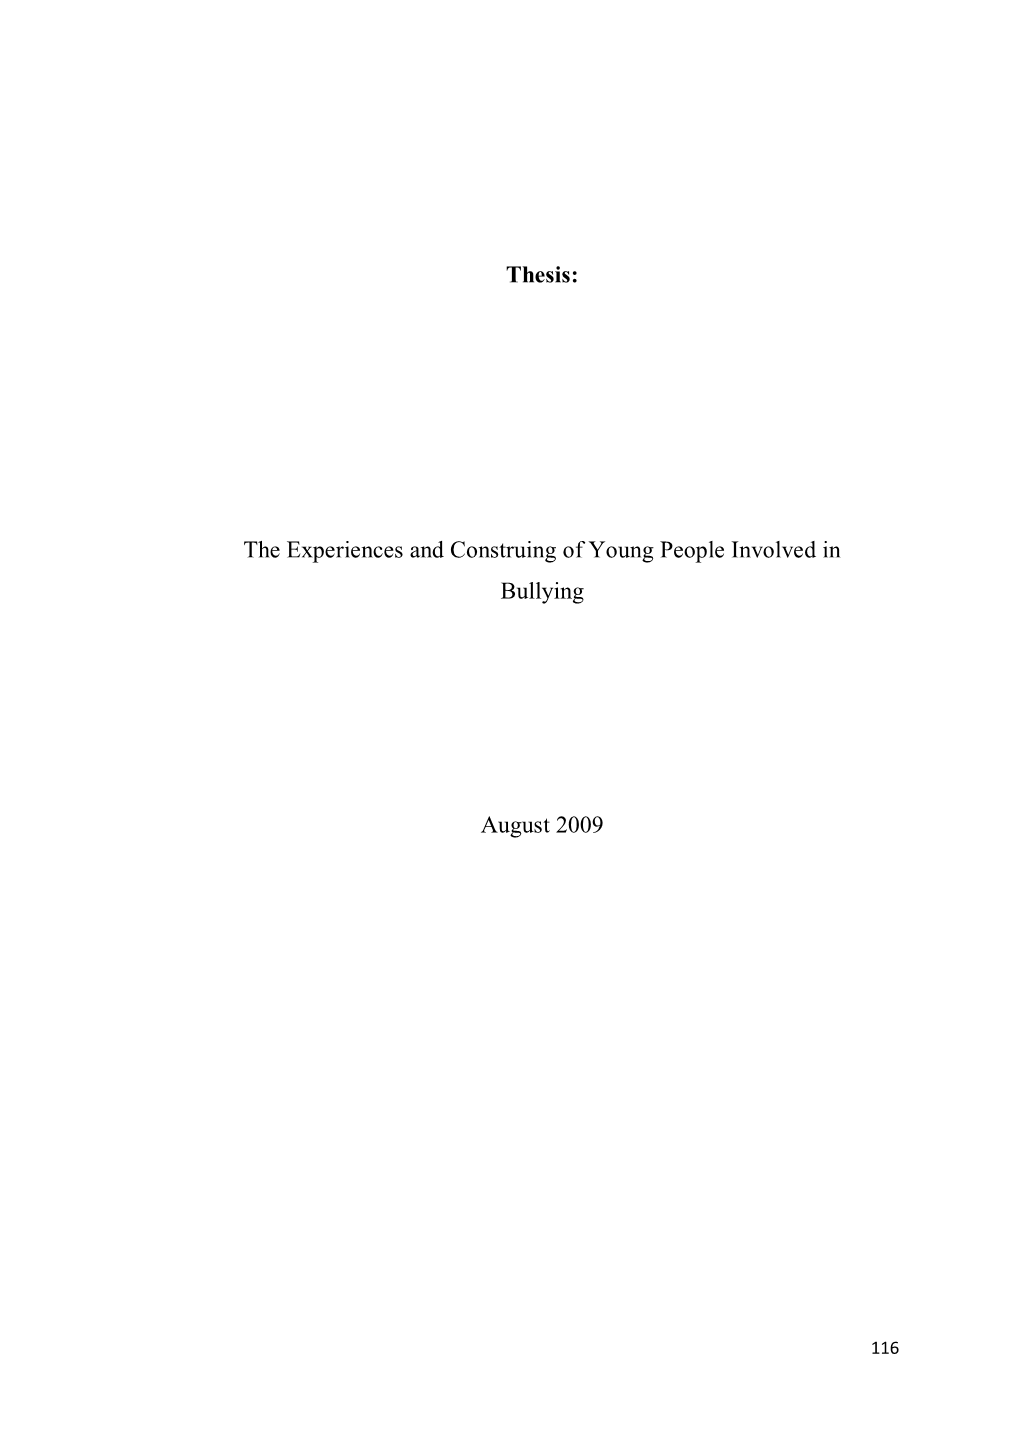 Thesis: the Experiences and Construing of Young People Involved in Bullying August 2009